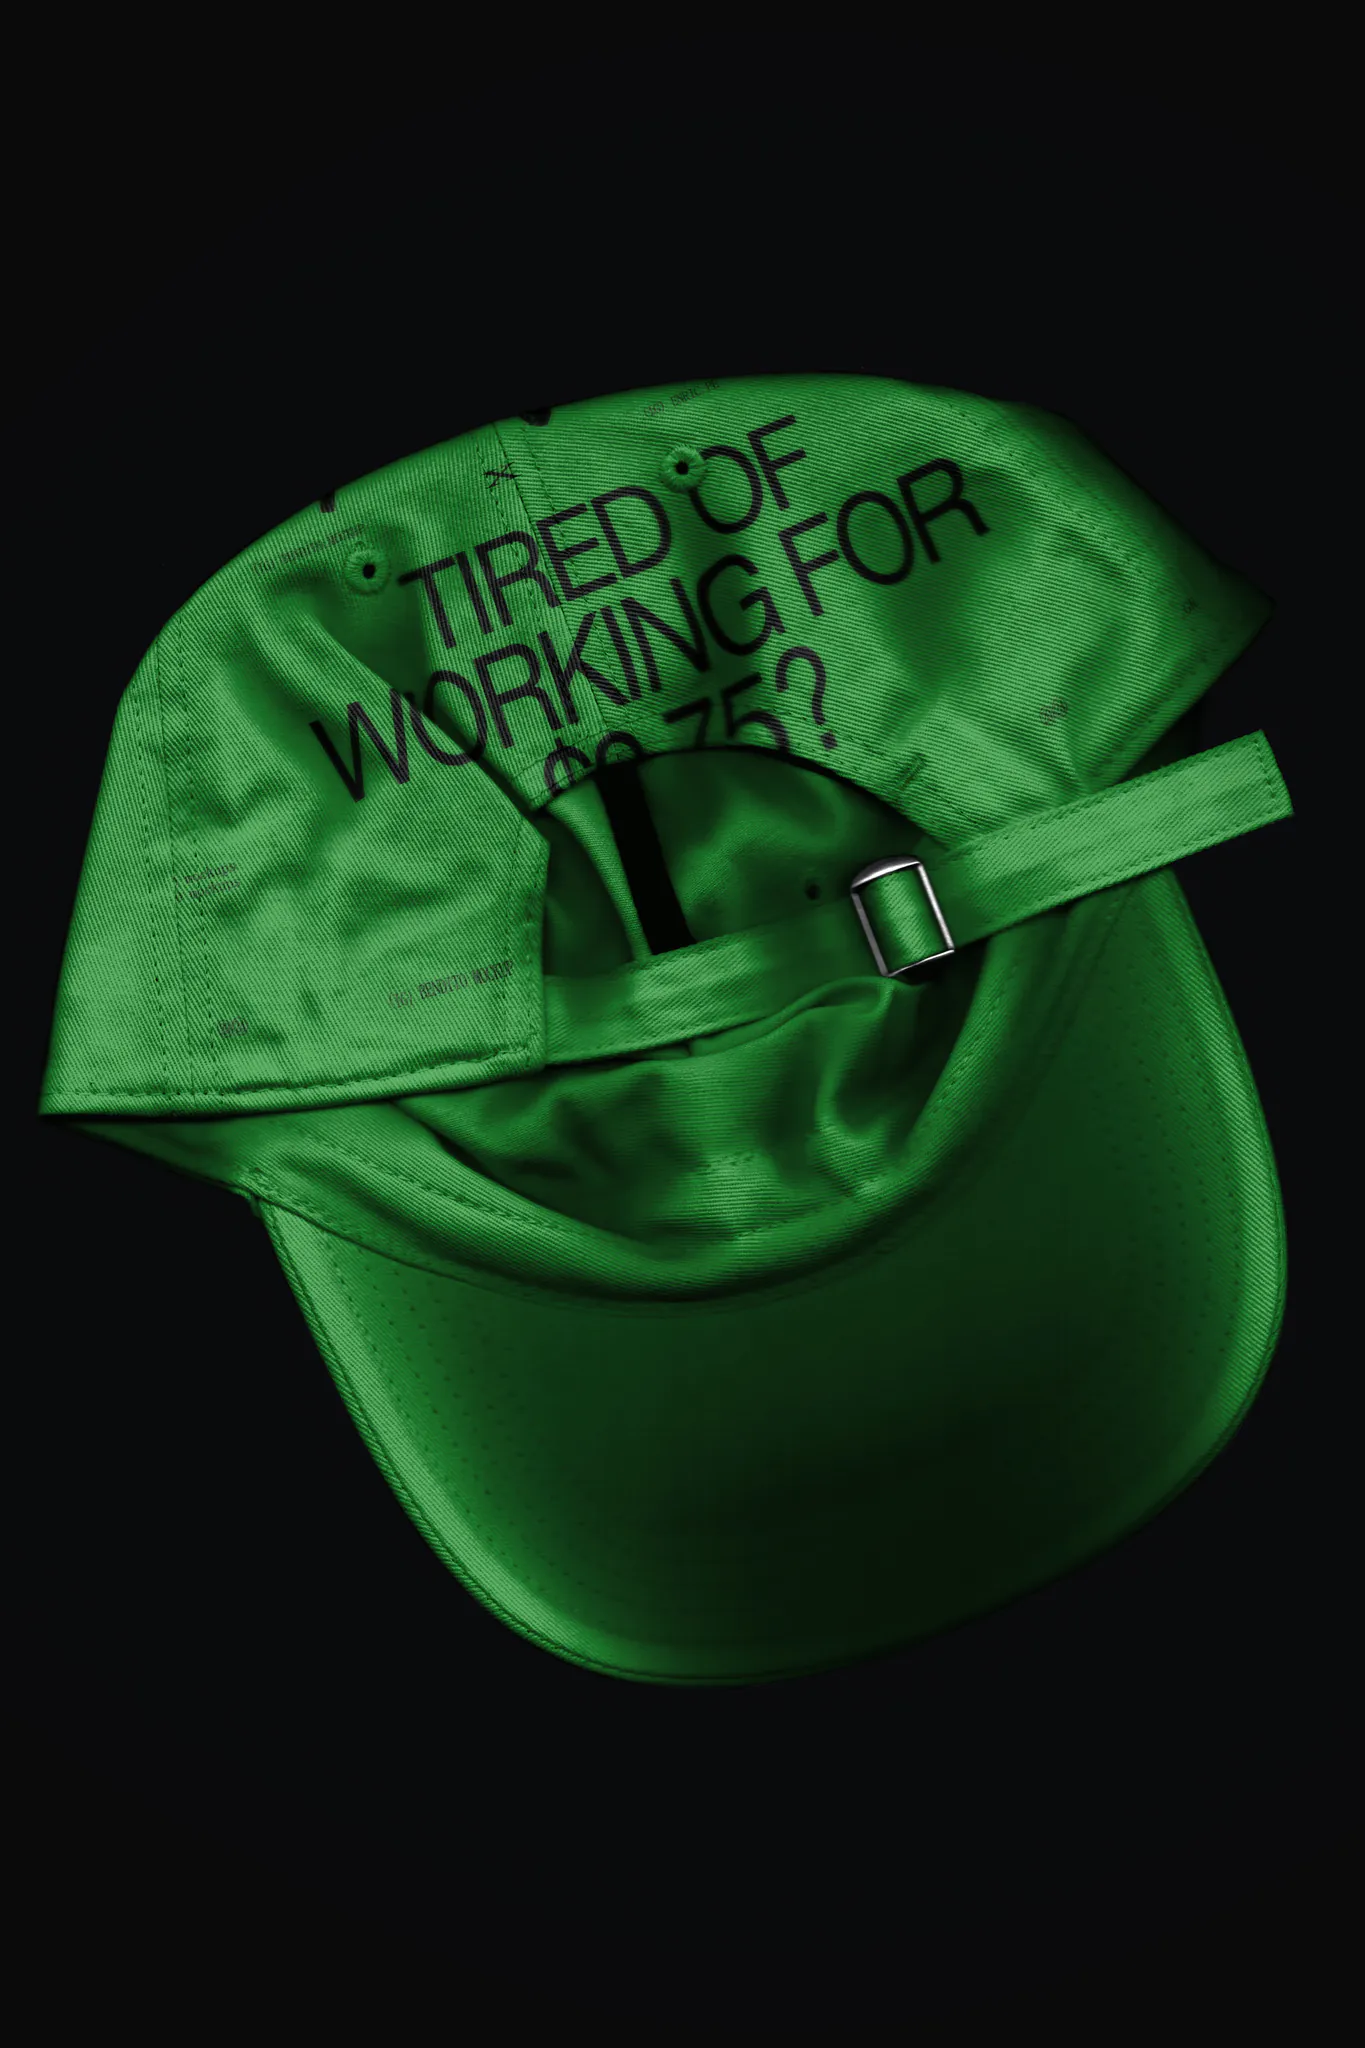 Scanned effect hat mockup. Frontal view of the back of a cap mockup. Realistic hat mockup flattened against a black background. Minimalistic cap mockup for Adobe Photoshop. Premium quality mockup.